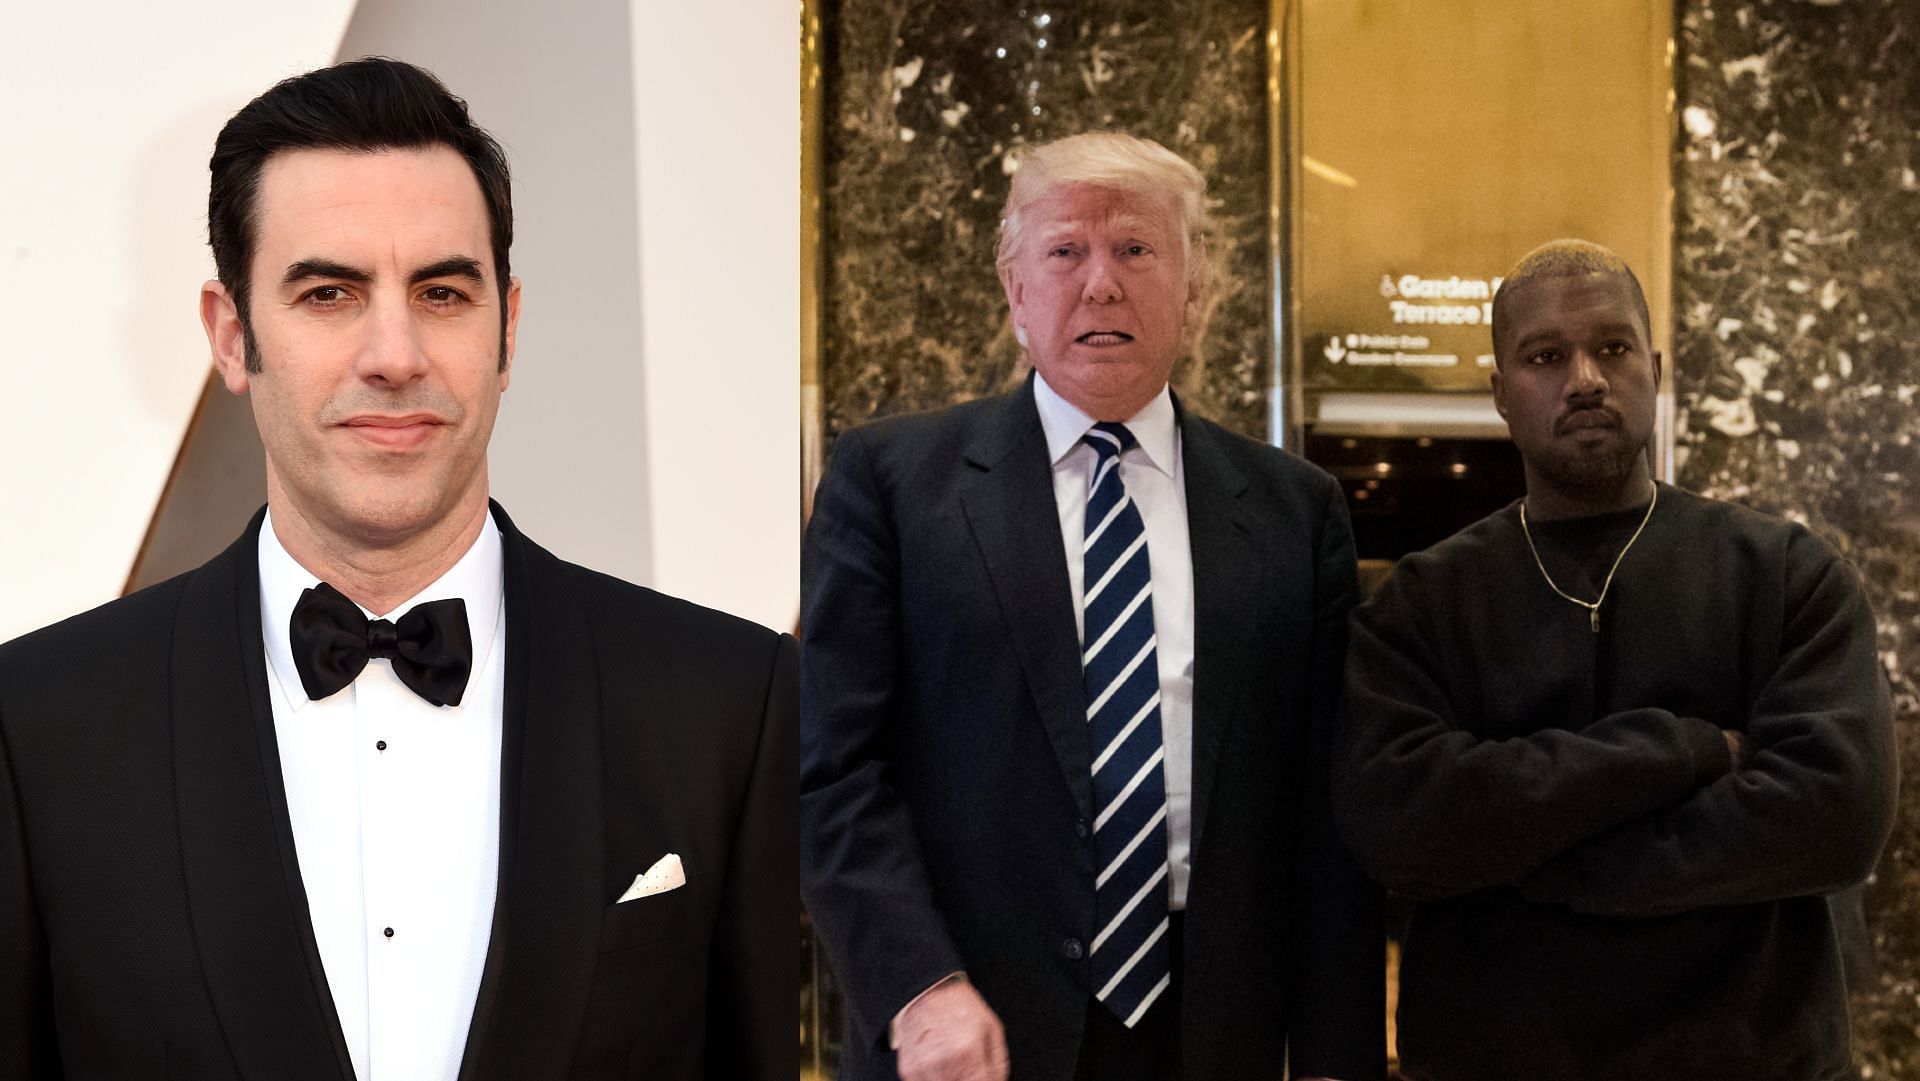 Sacha Baron Cohen donned his character from Borat to entertain people at the Kennedy Center Honors. (Image via Jason Merritt/Getty, Drew Angerer/Getty)